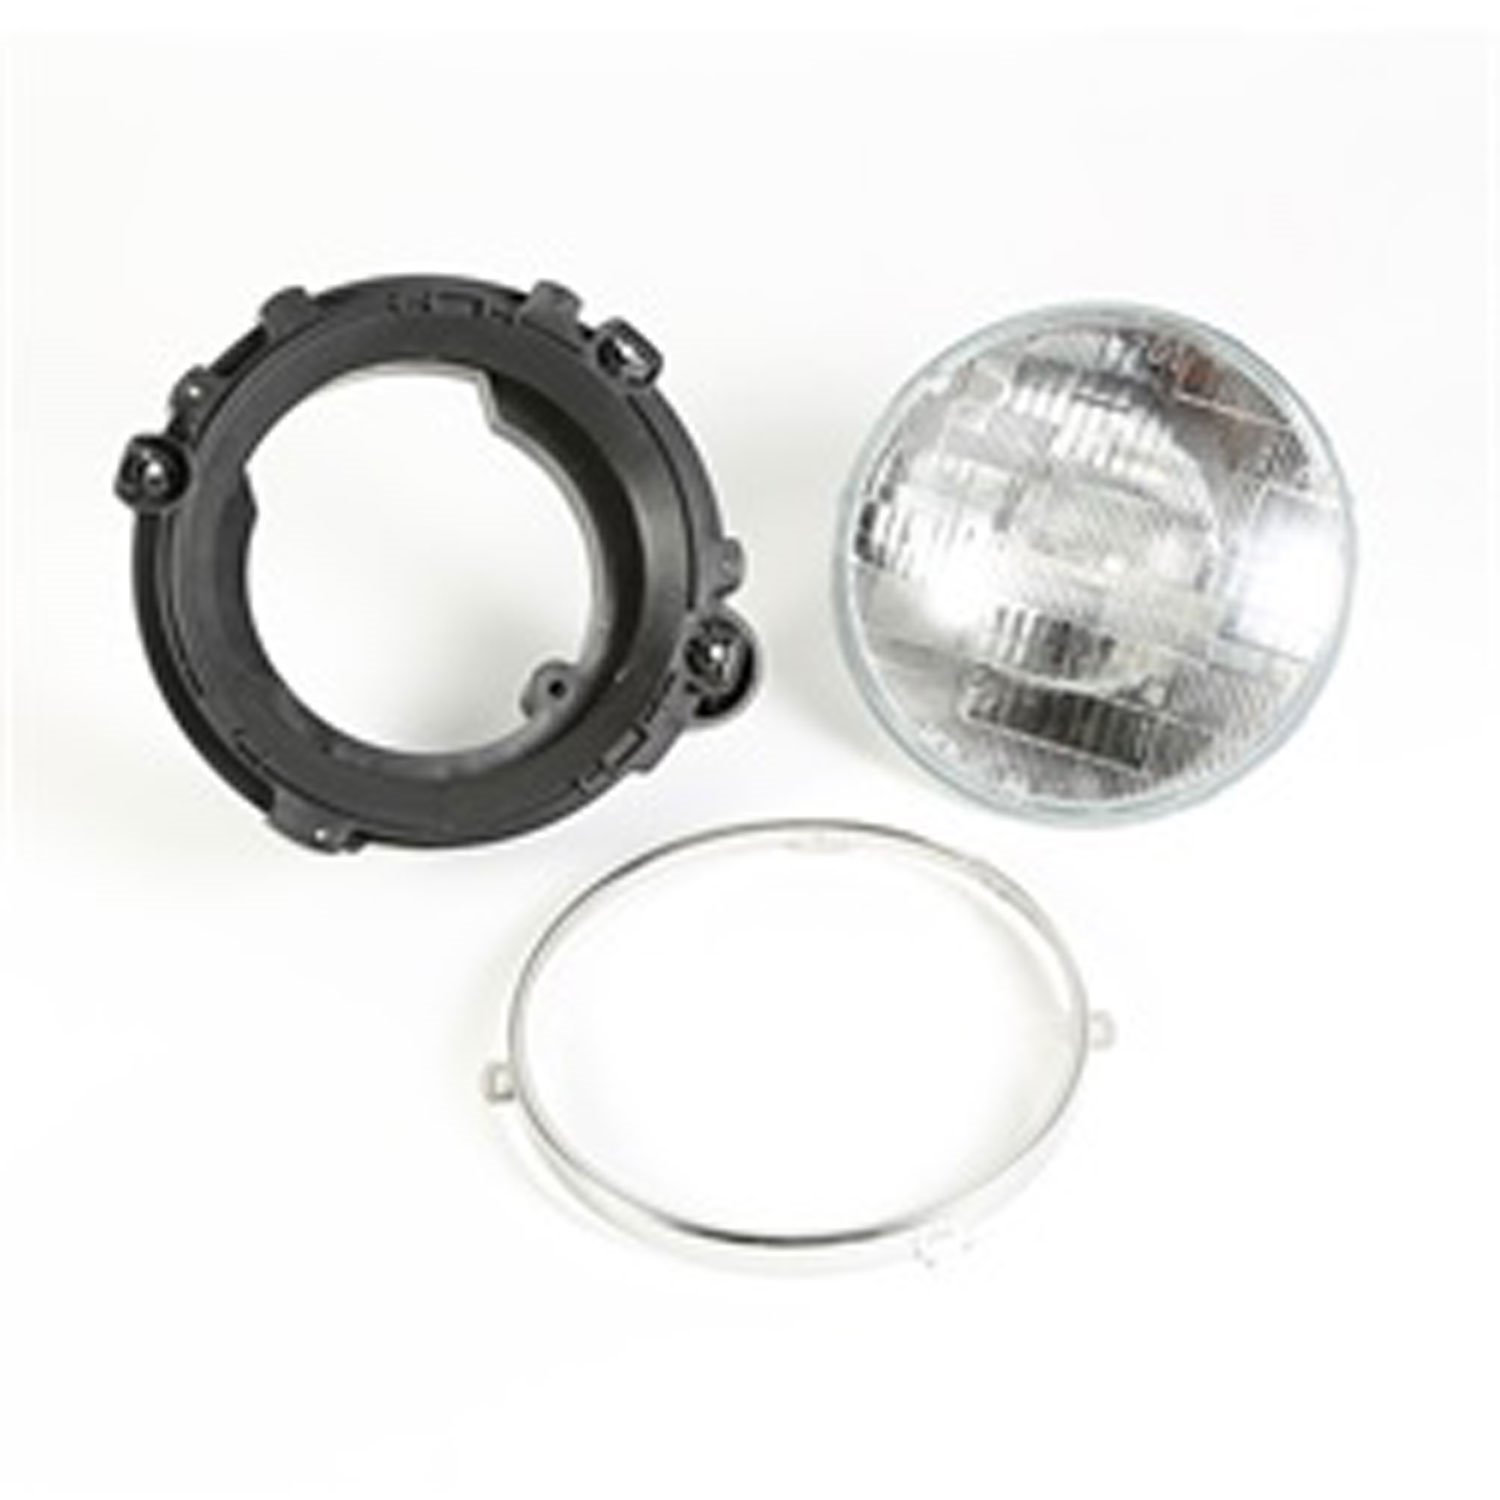 Replacement headlight assembly from Omix-ADA, Fits right side